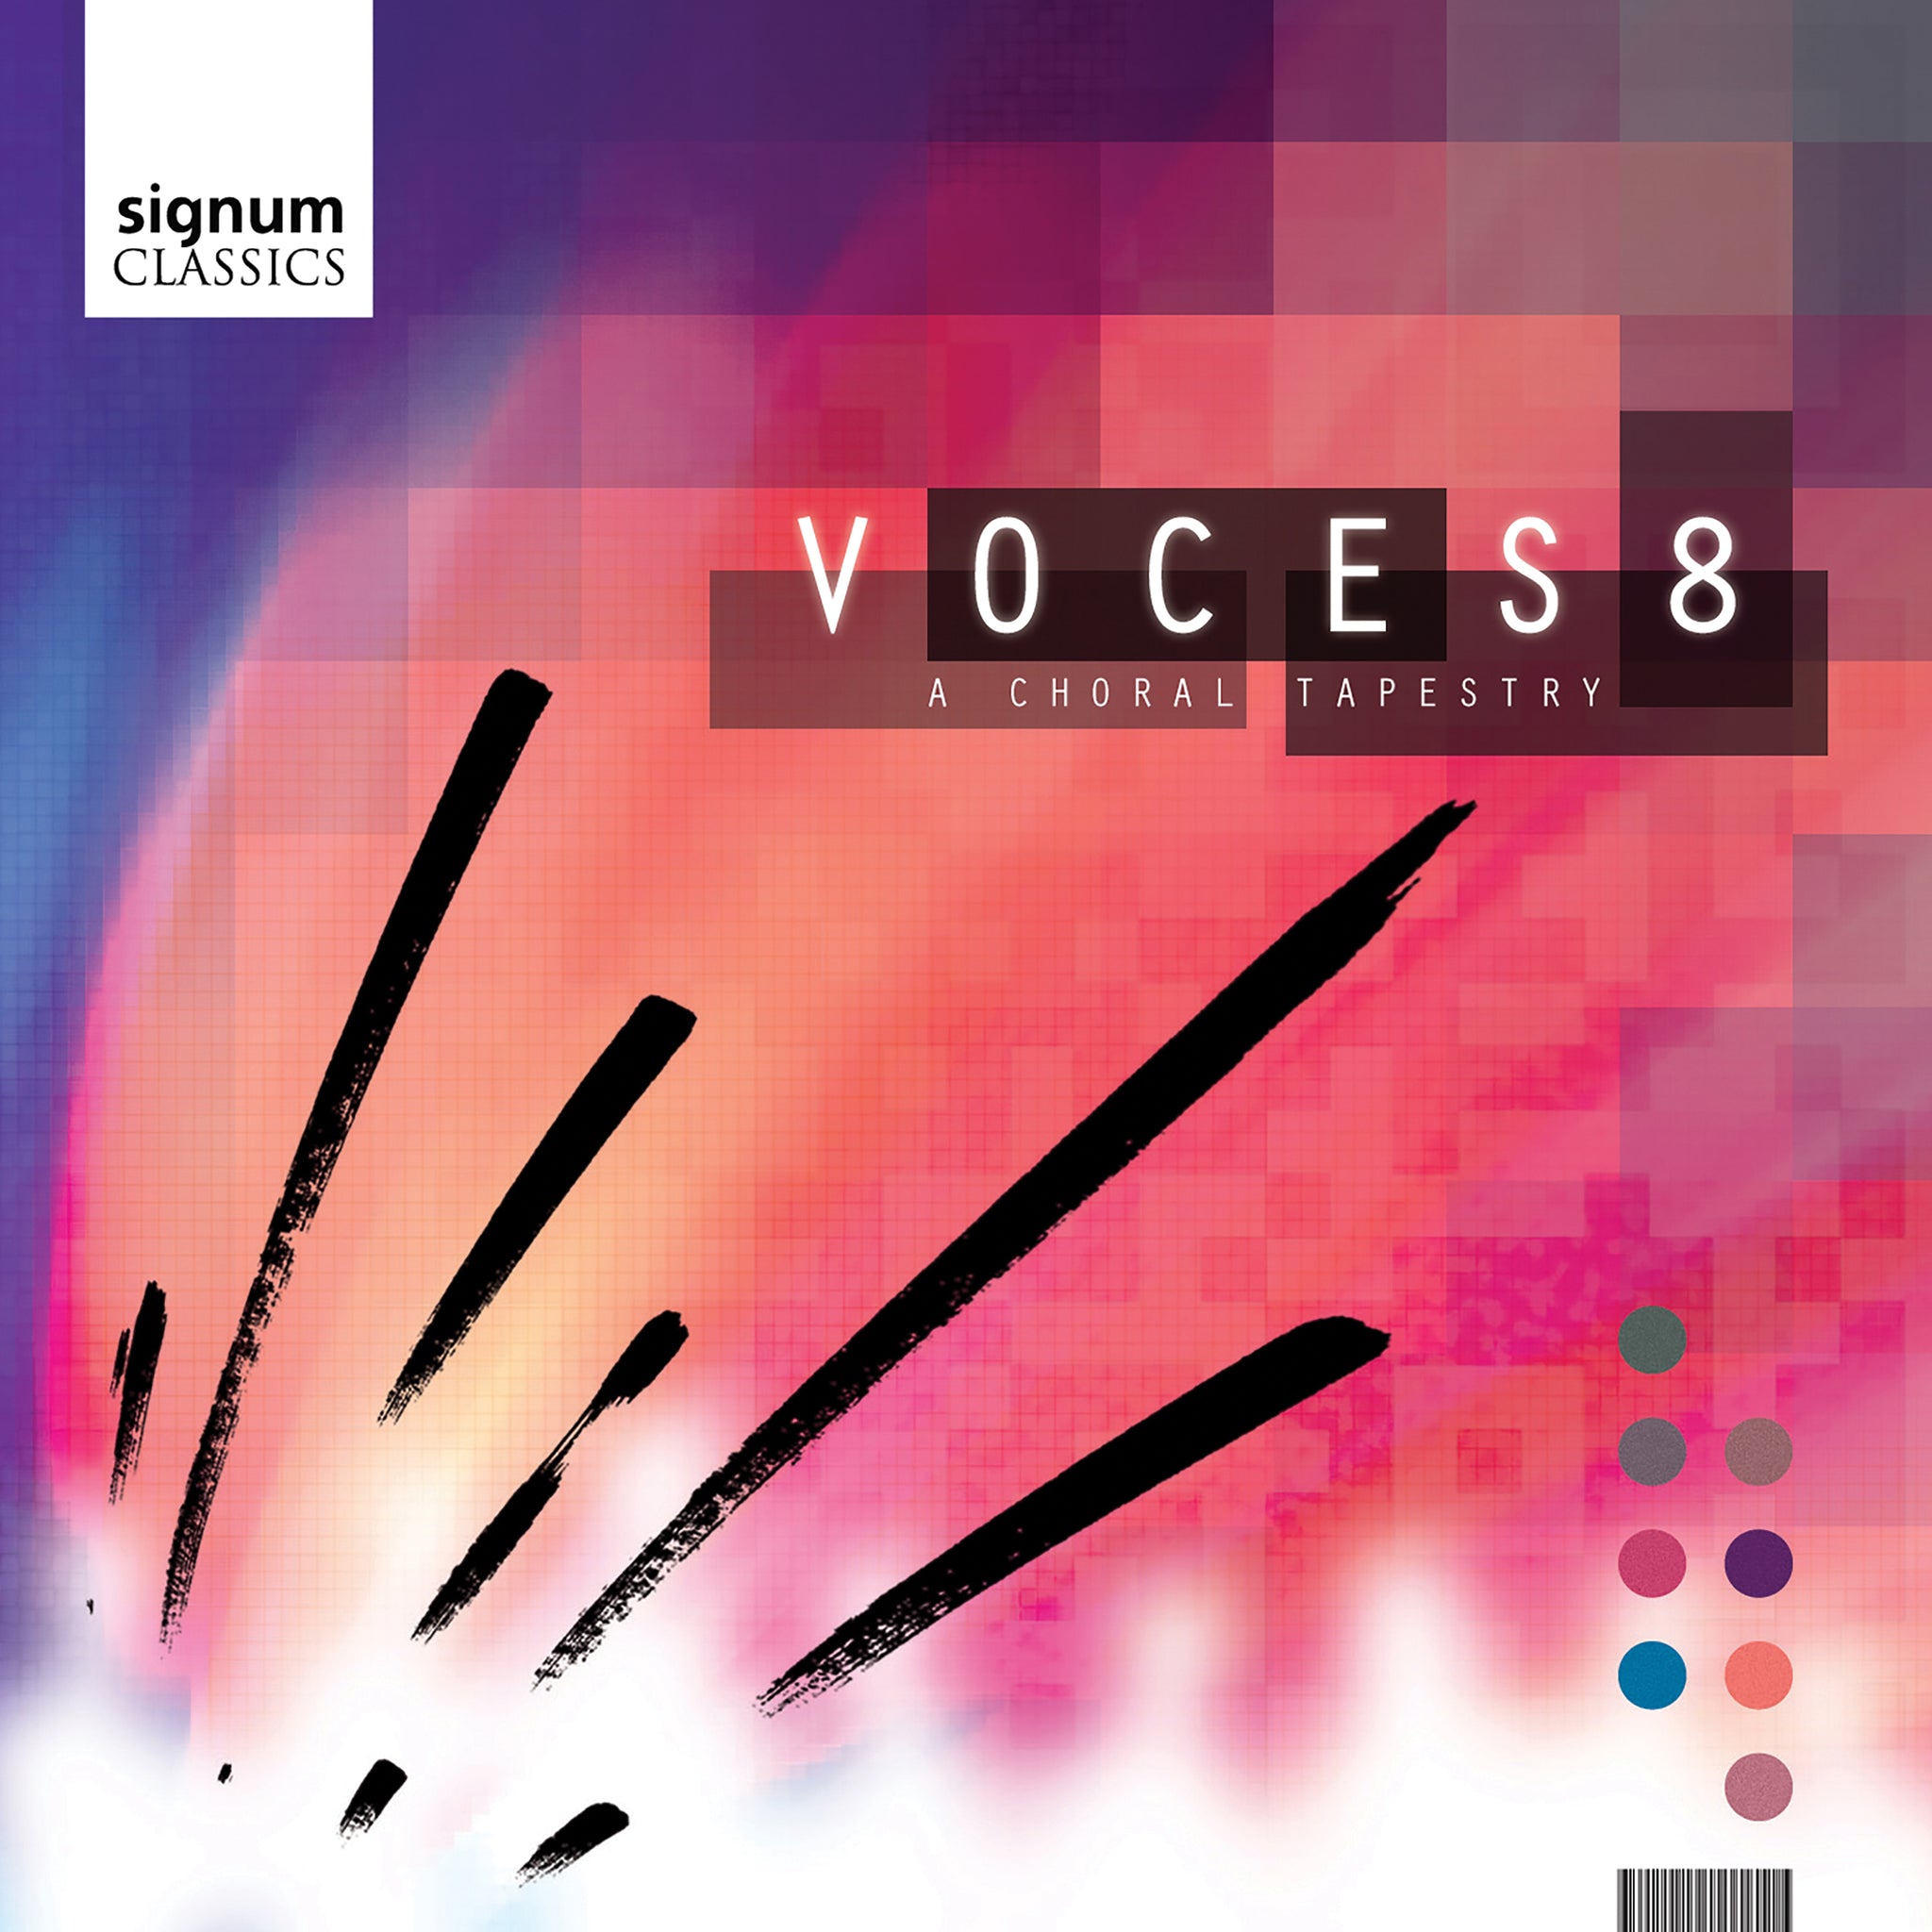 A Choral Tapestry / Voces8